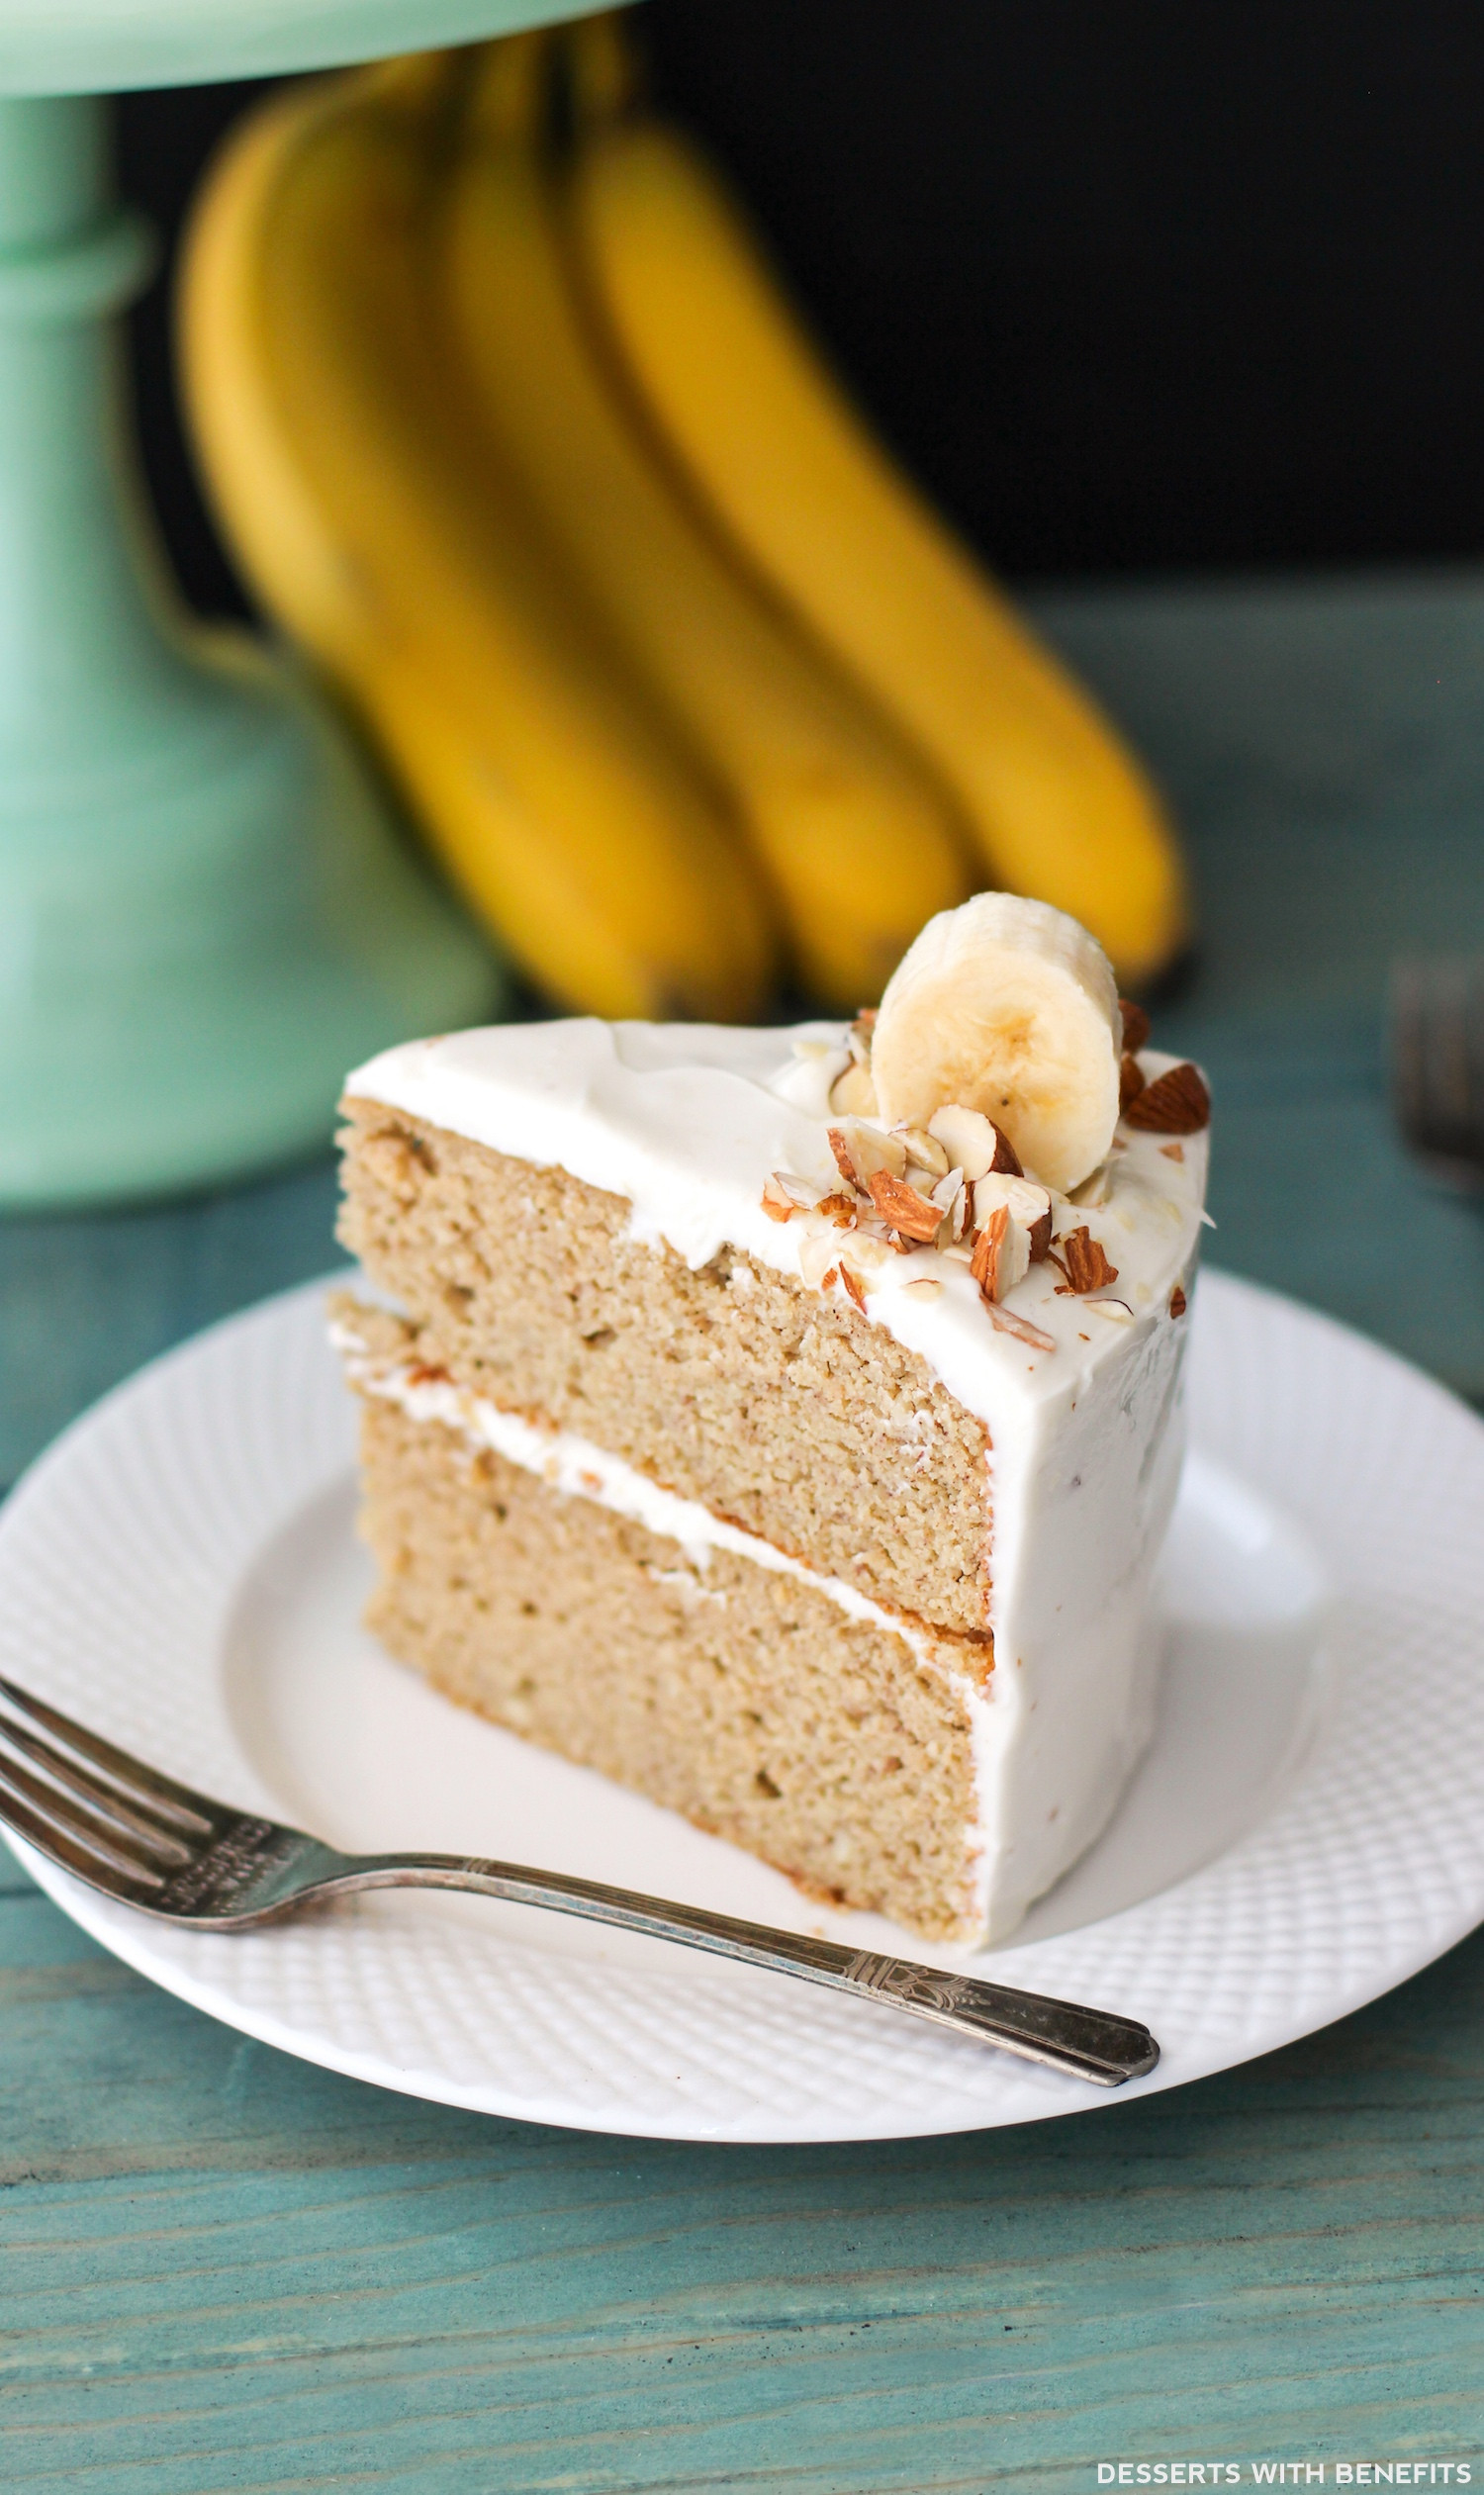 Healthy Cake Recipe
 Gluten Free Healthy Banana Cake with Cream Cheese Frosting